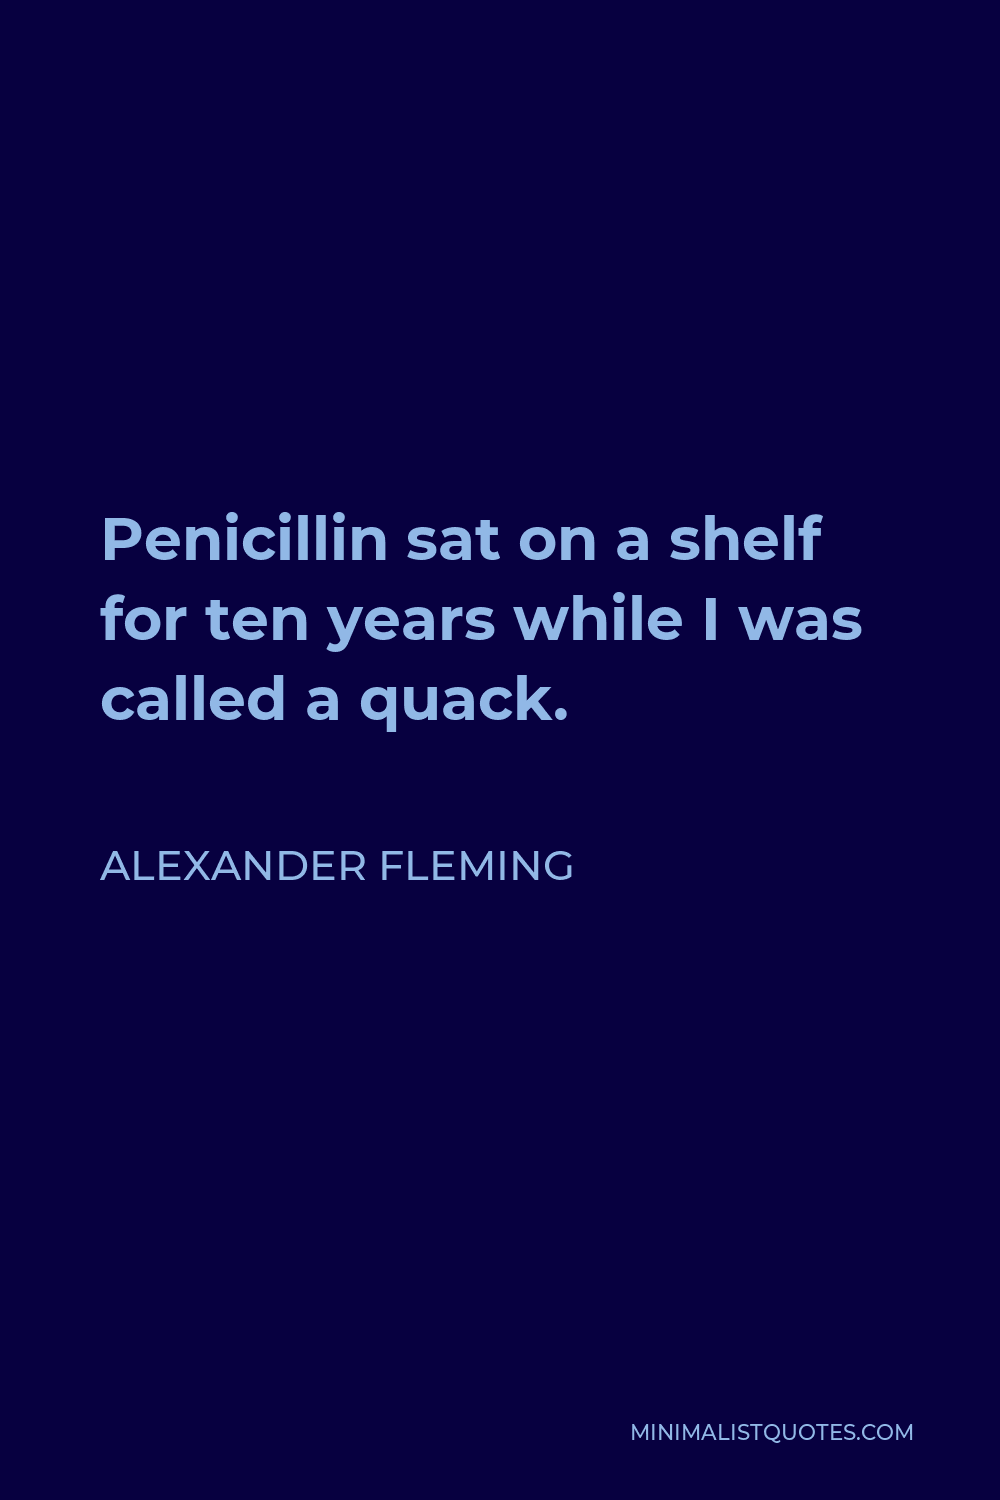 Alexander Fleming Quote - Penicillin sat on a shelf for ten years while I was called a quack.